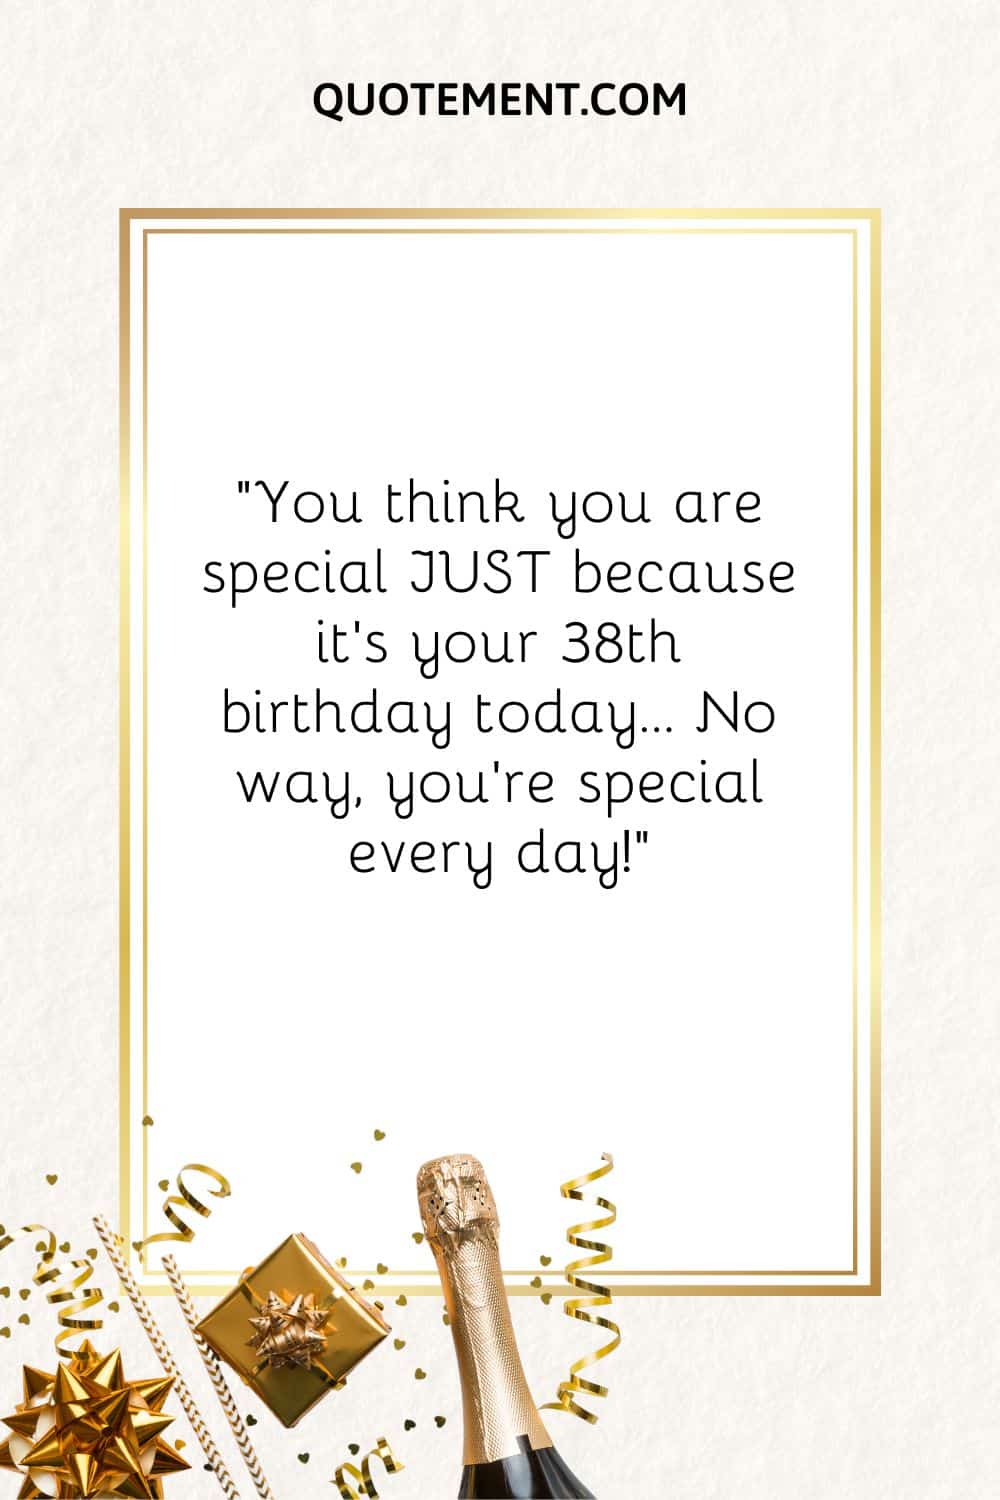 You think you are special JUST because it’s your 38th birthday today